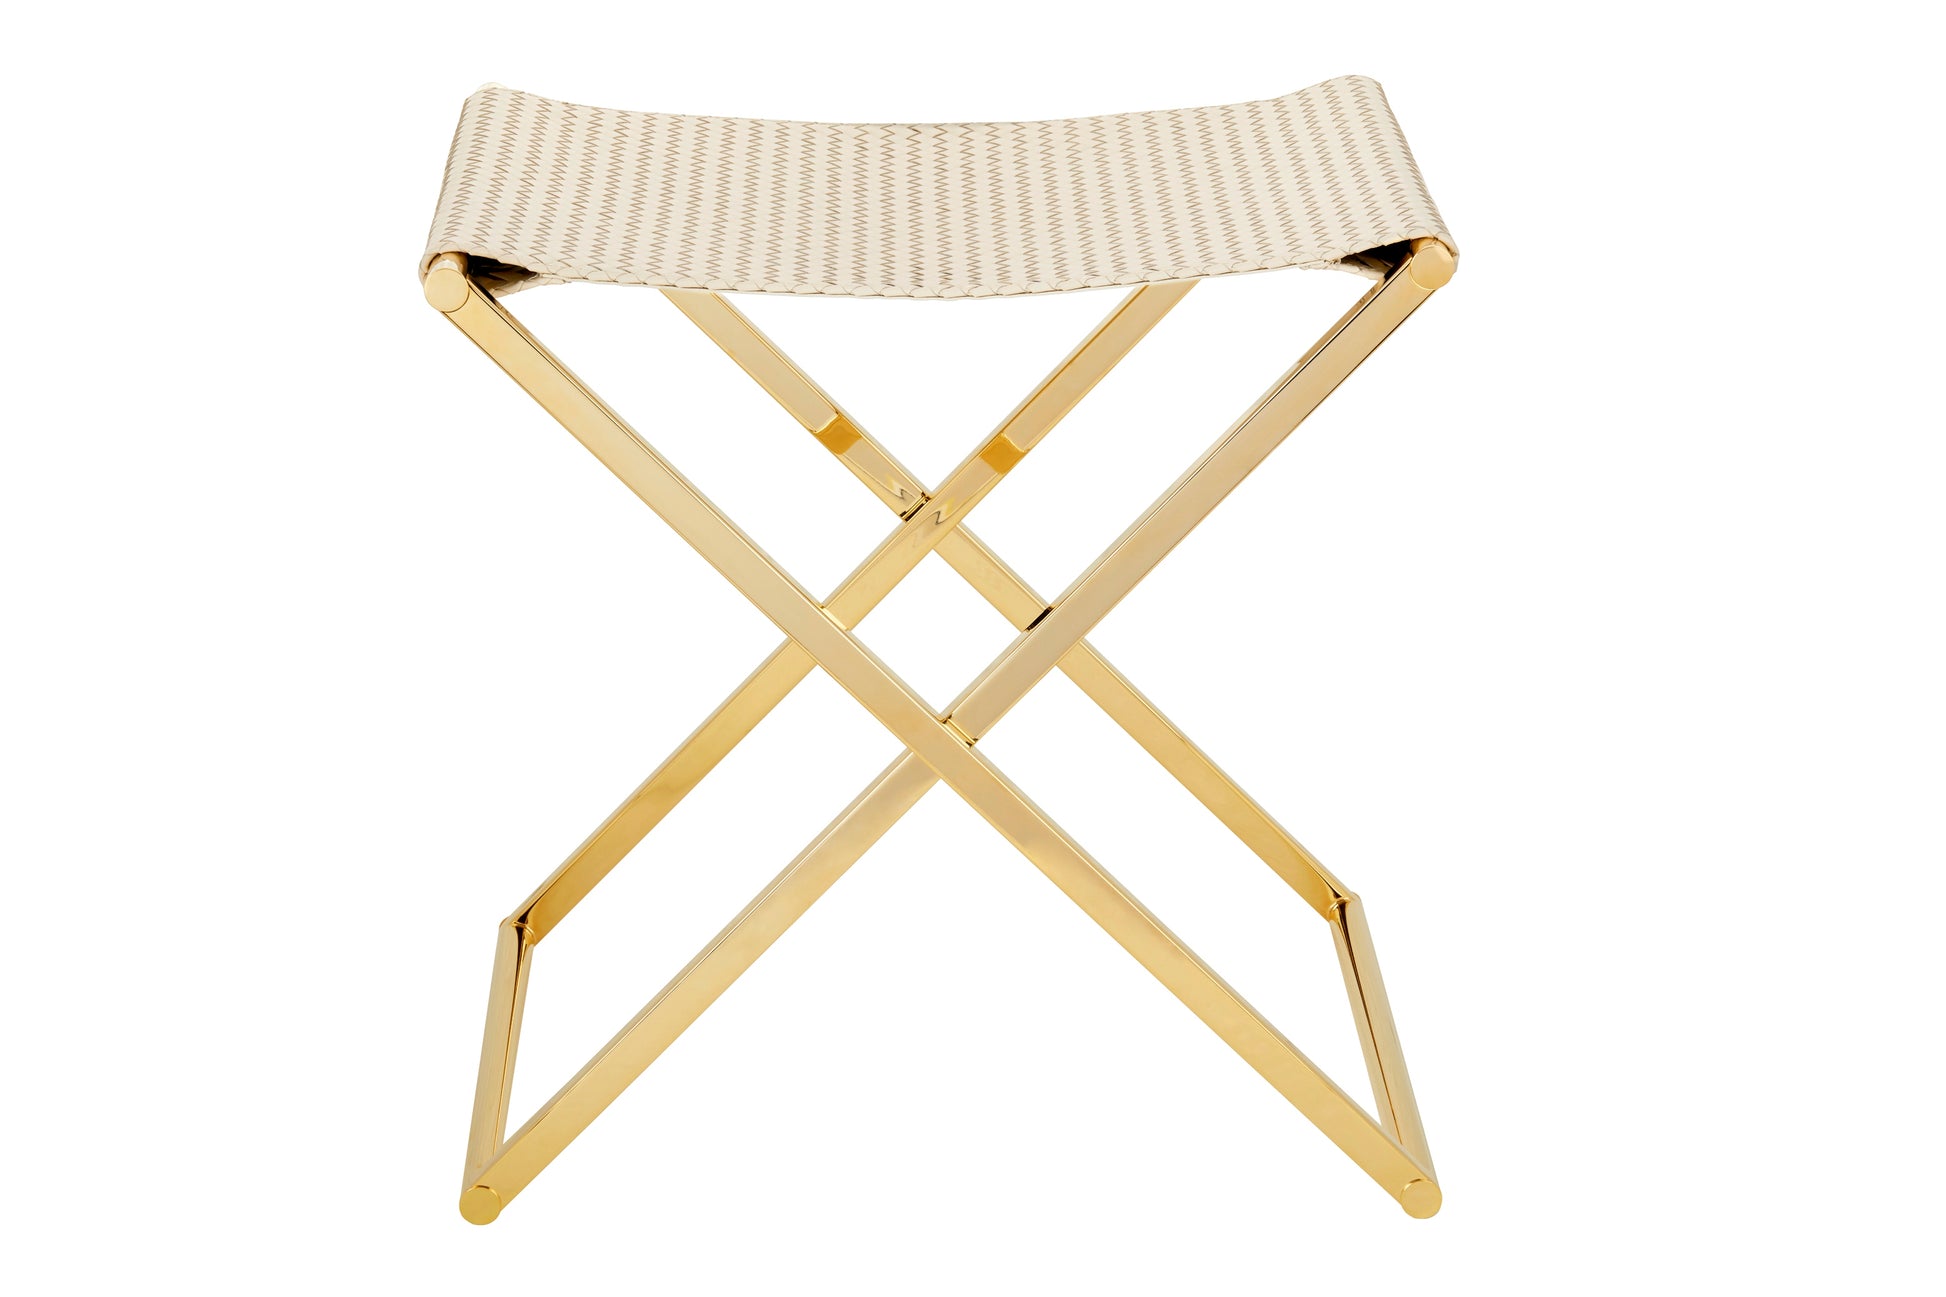 Ionio Folding Stool | Luggage Rack by Riviere | Folding stool | luggage rack with handwoven leather seat, chrome or gold metal legs. | Furniture and Luggage Accessories | 2Jour Concierge, your luxury lifestyle shop